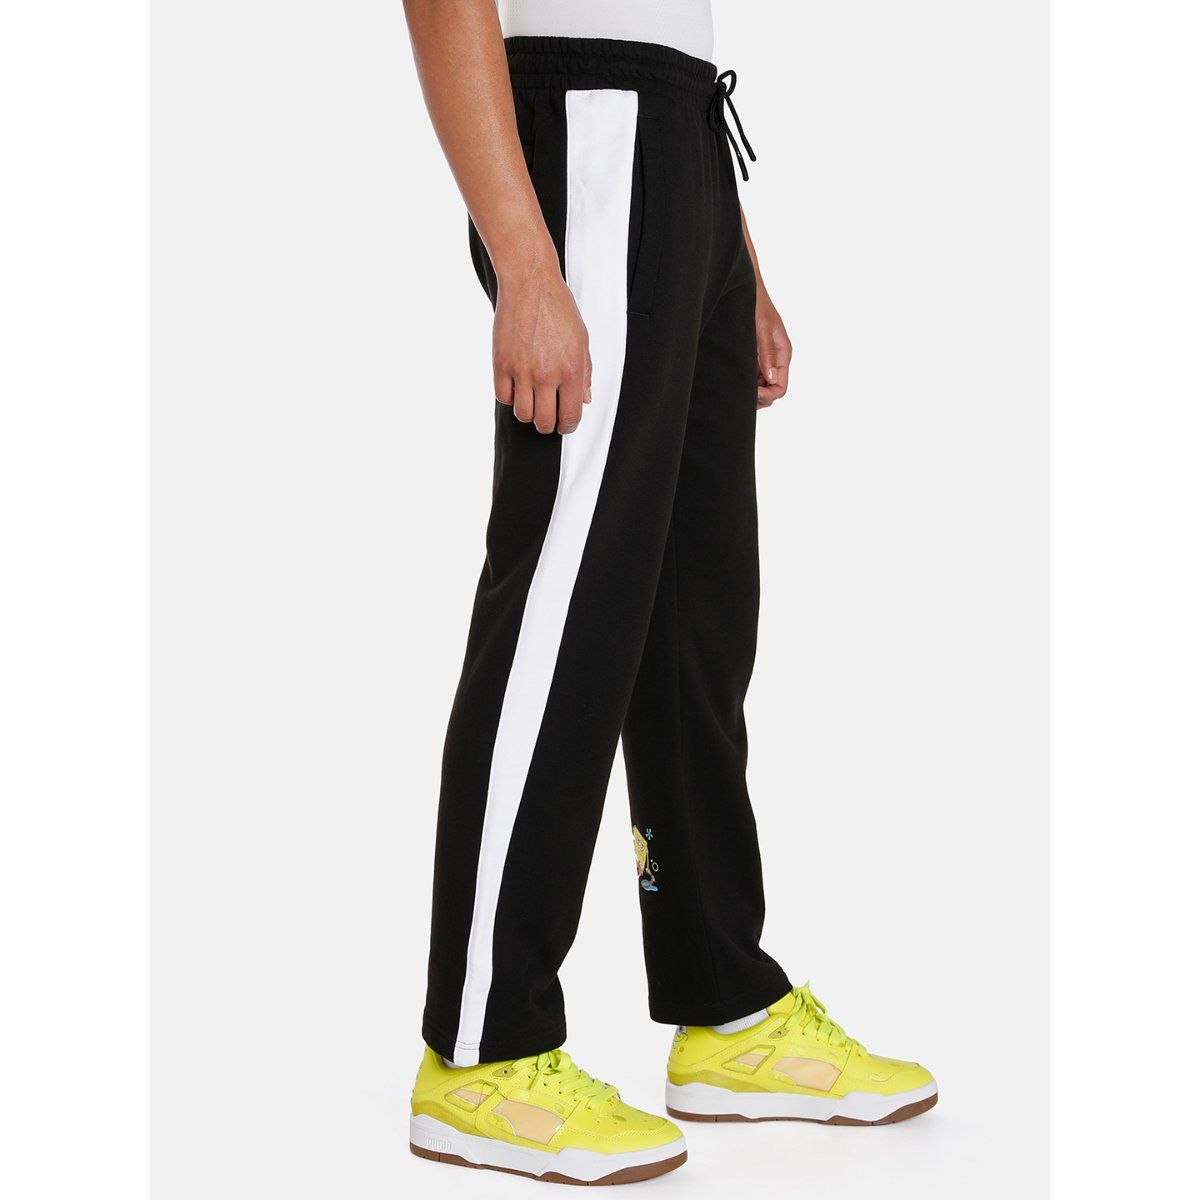 adidas M 3s Wv E Pt Black Walking Track Pant Buy adidas M 3s Wv E Pt Black  Walking Track Pant Online at Best Price in India  NykaaMan